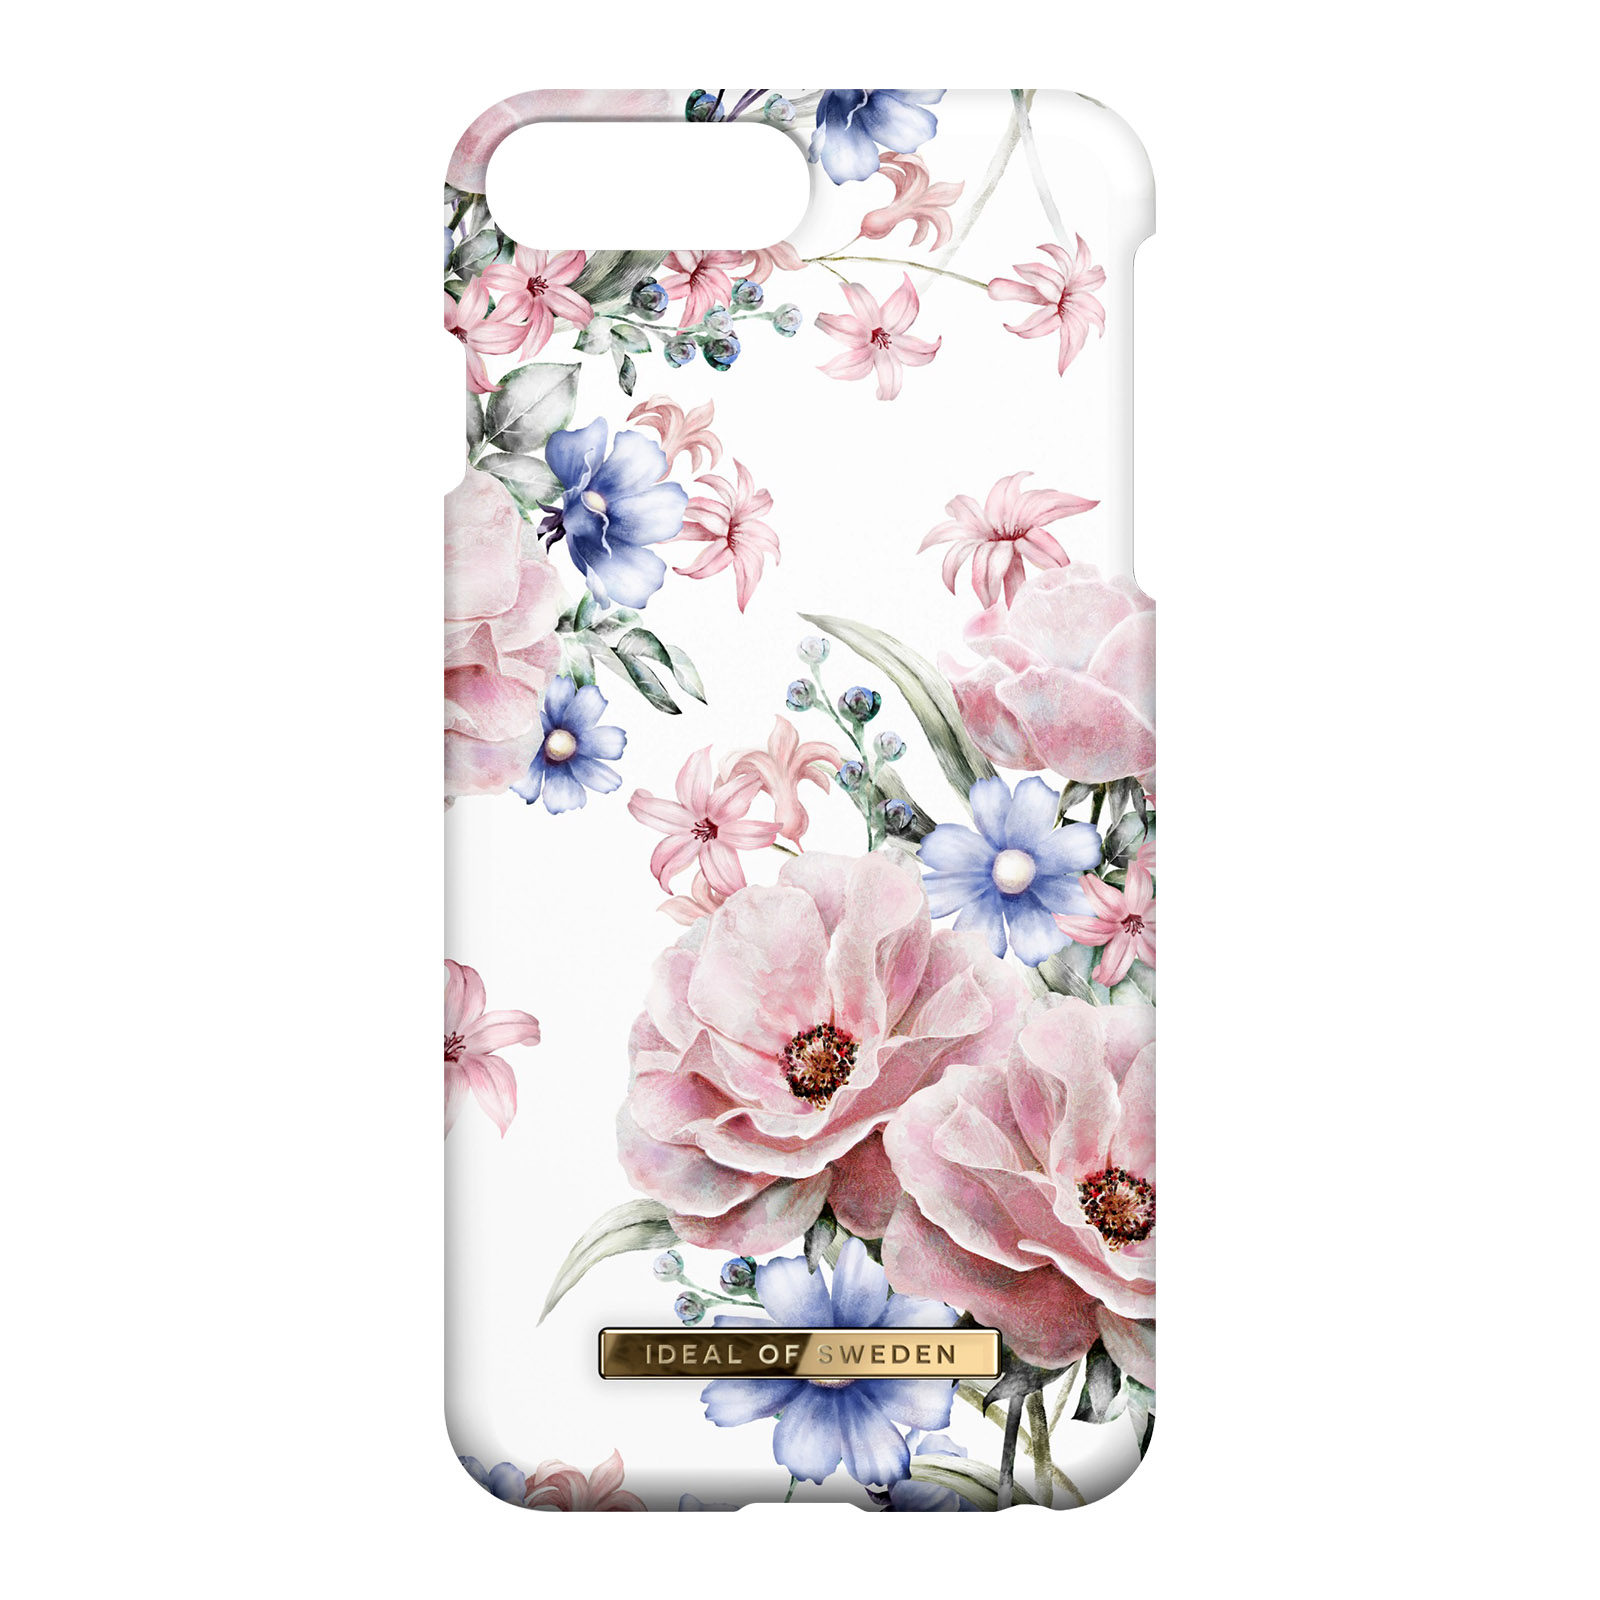 IDEAL OF SWEDEN Backcover, Floral Apple, Plus, Rosa Romance iPhone Series, 8